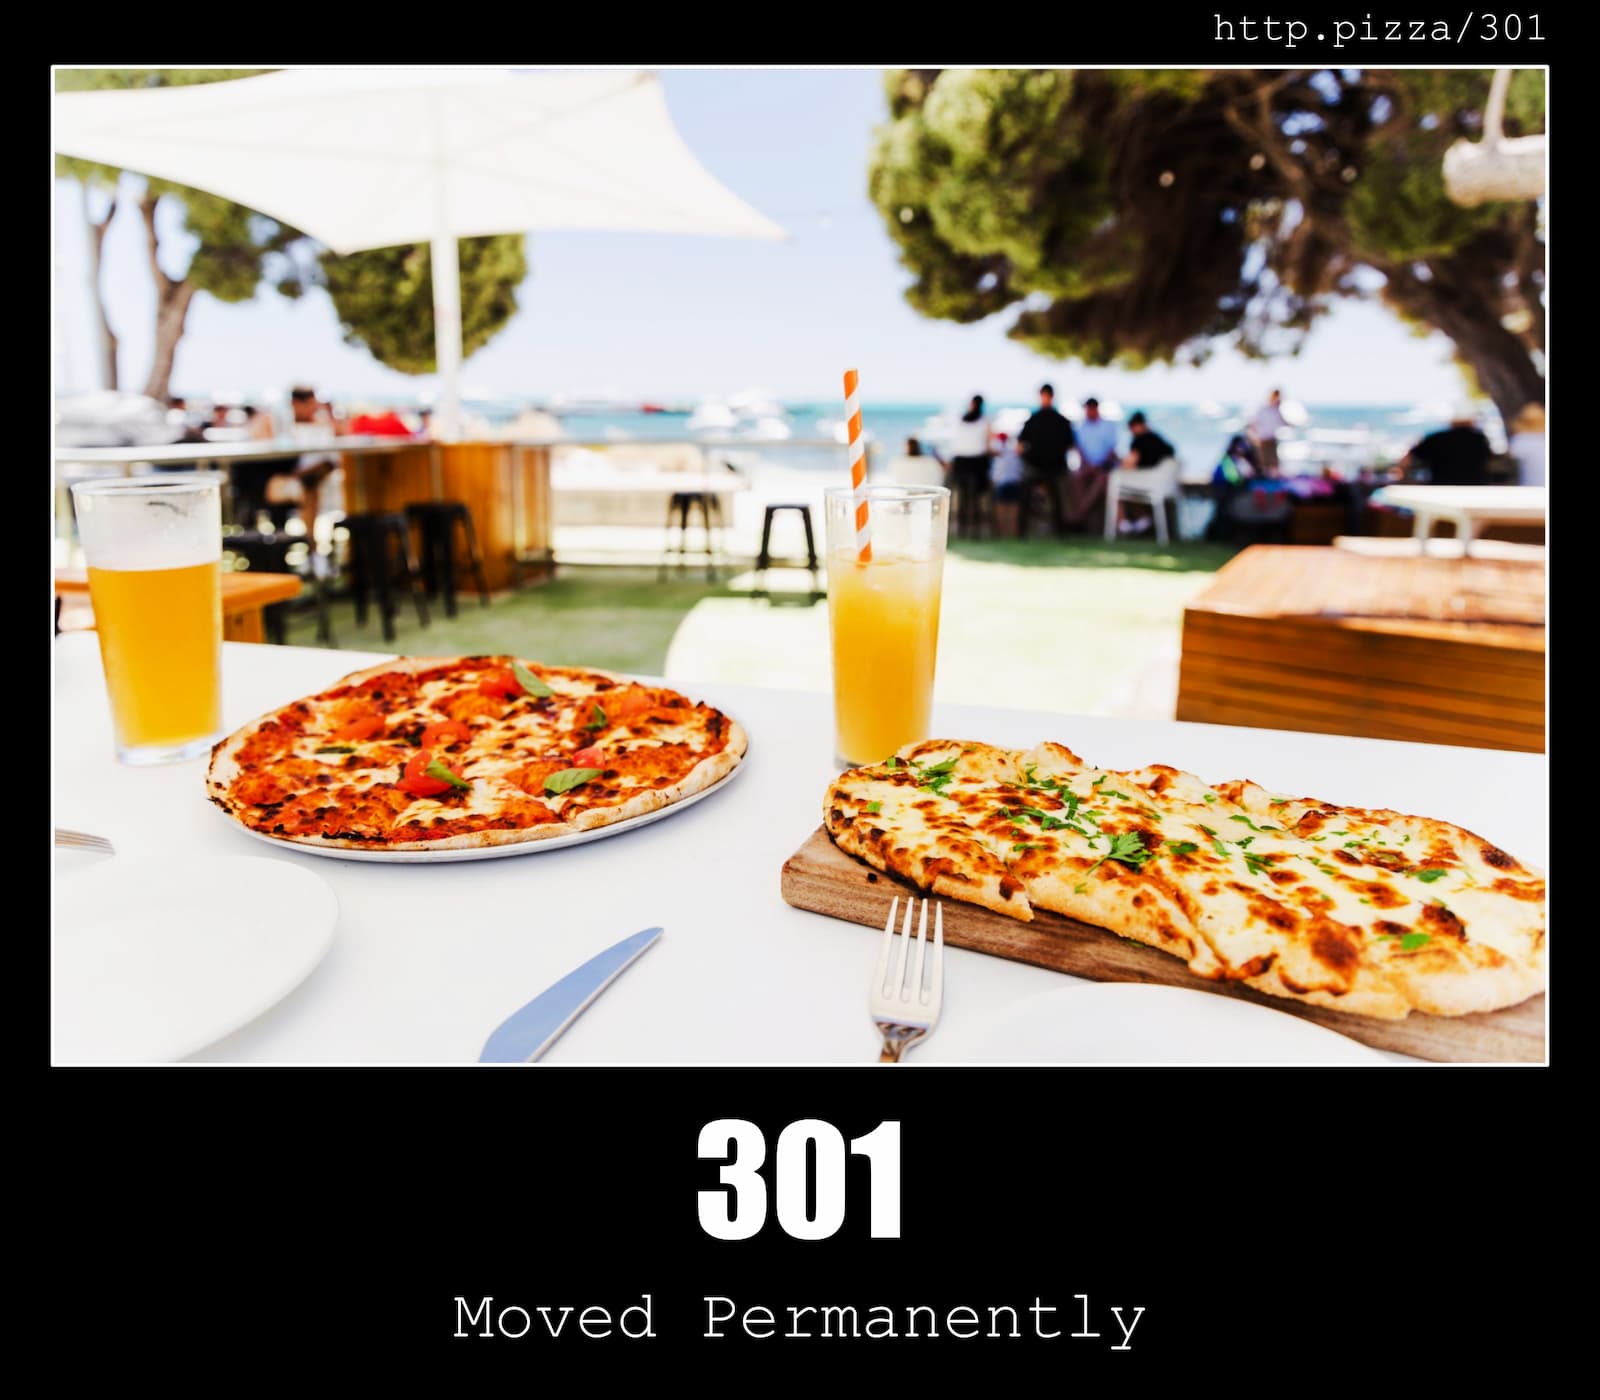 HTTP Status Code 301 Moved Permanently & Pizzas